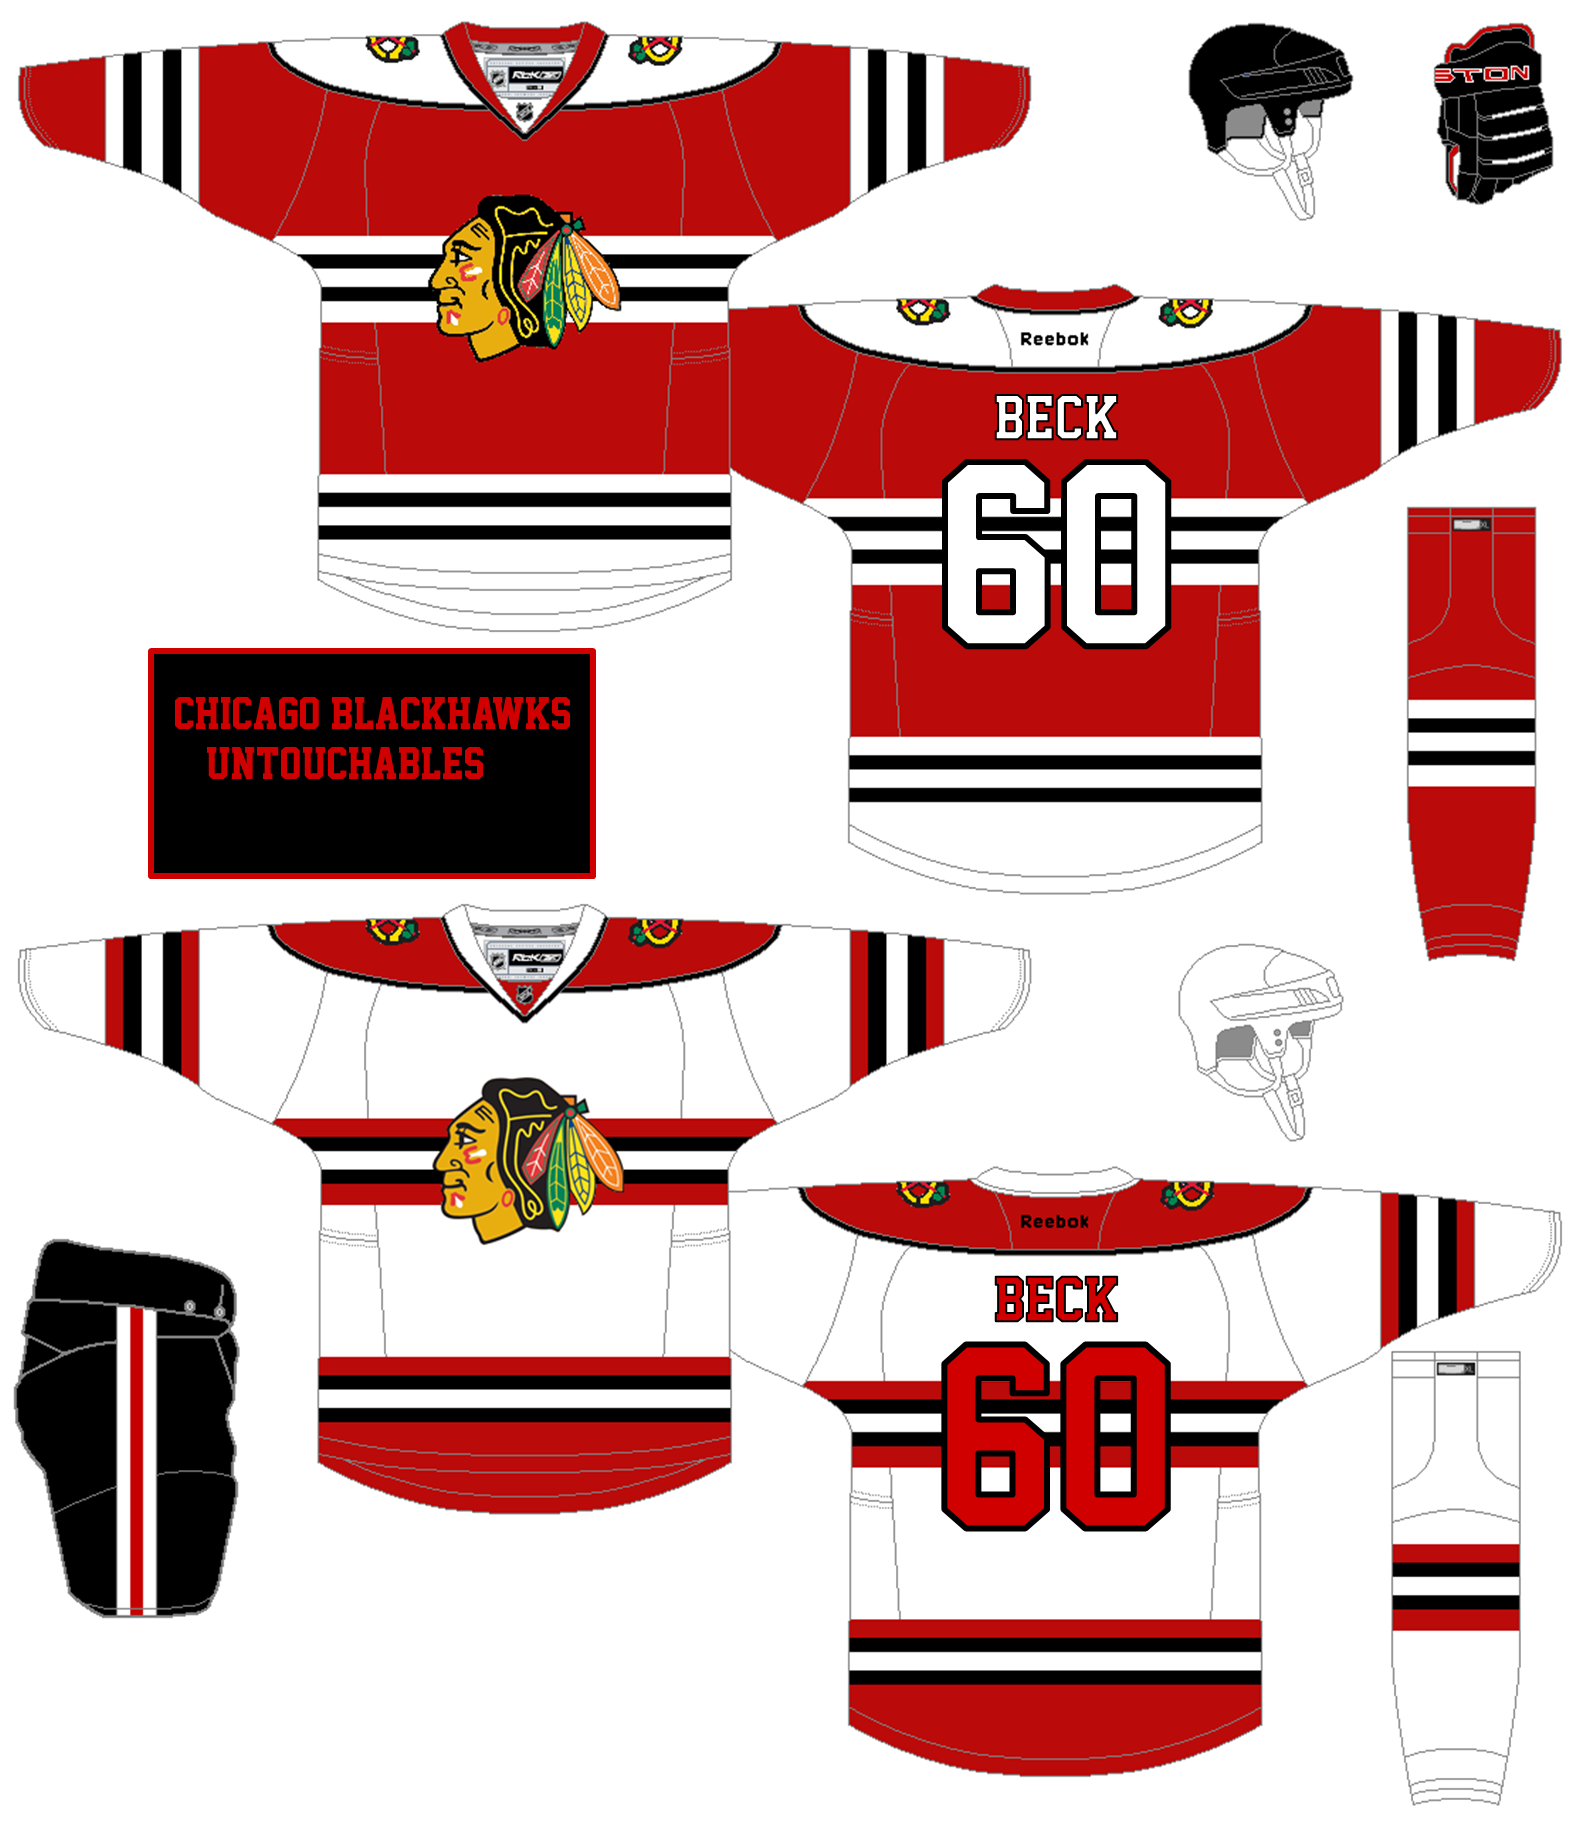 Chicago Blackhawks Untouchables Concept By Nyislander12